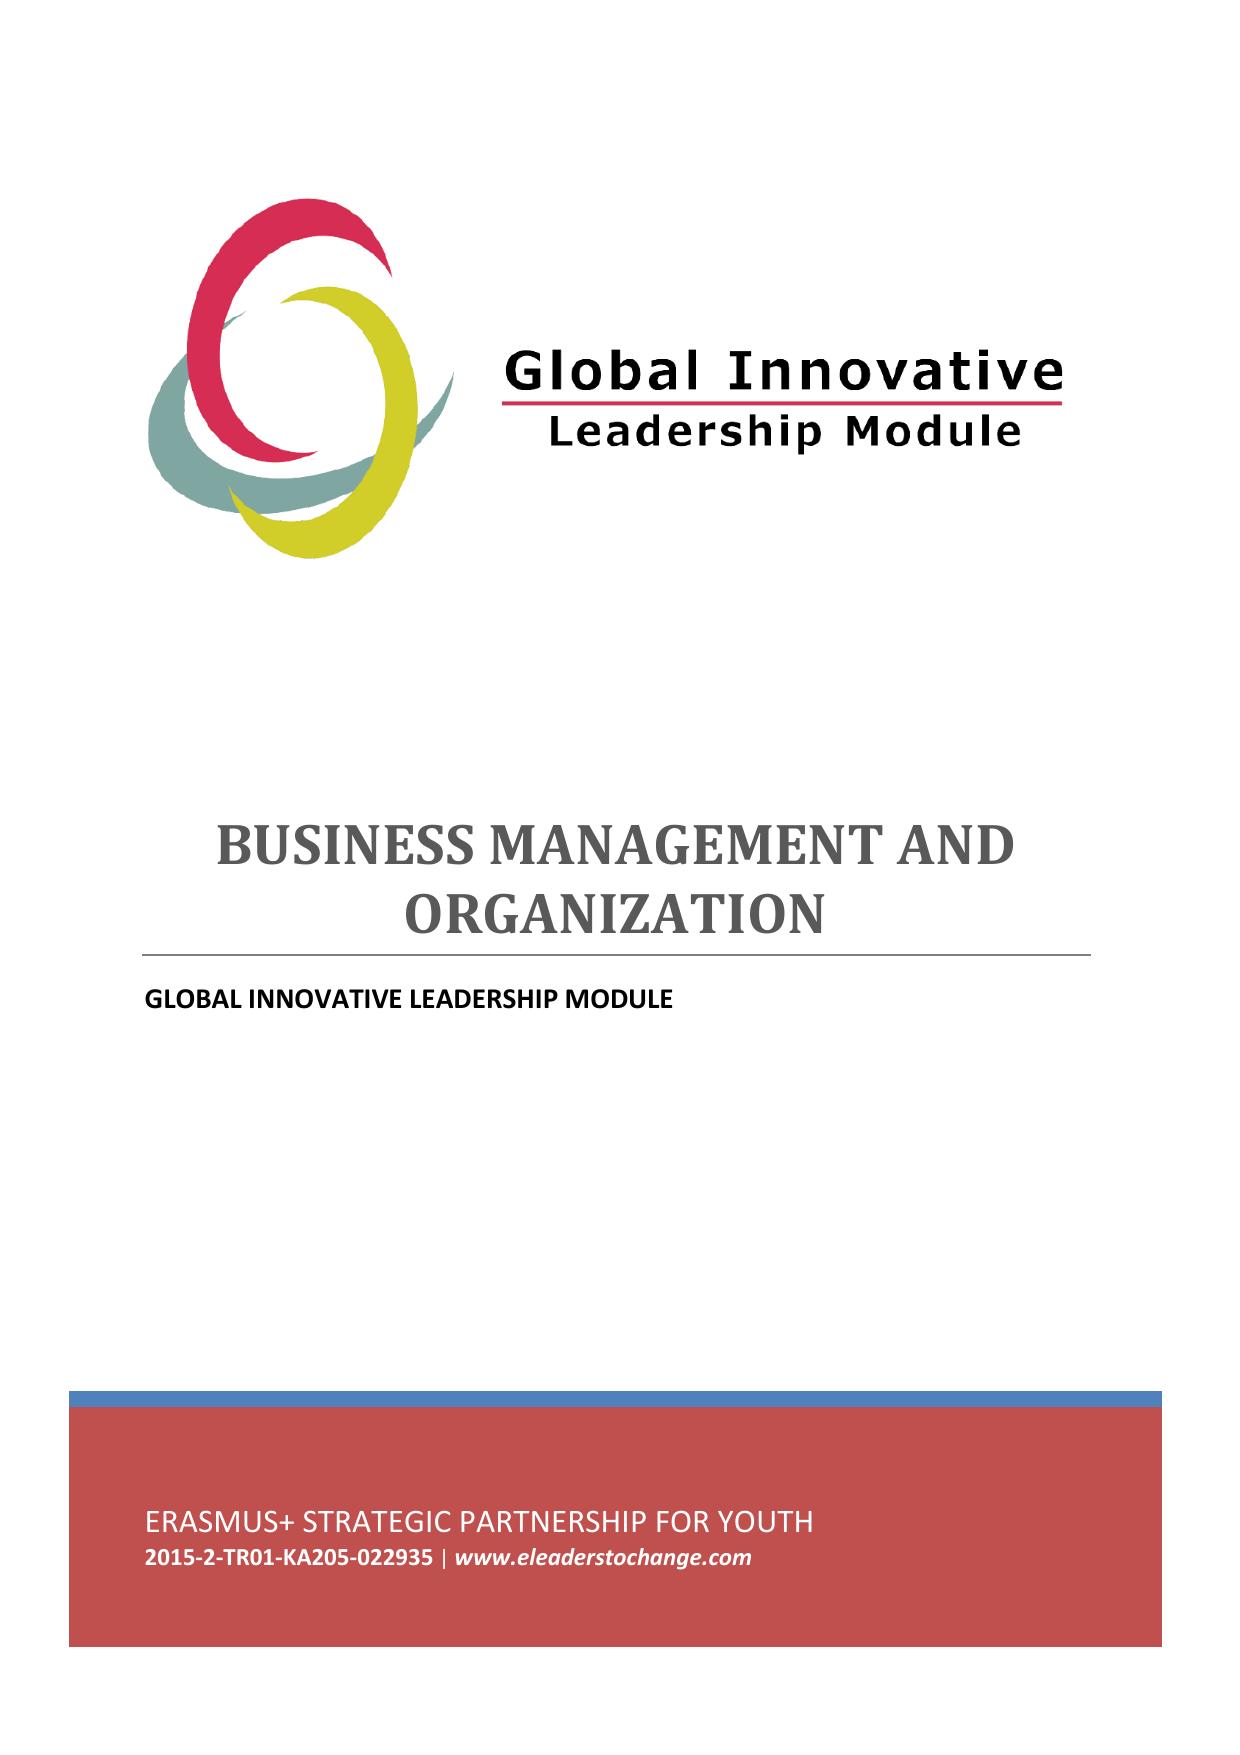 BUSINESS MANAGEMENT AND ORGANIZATION